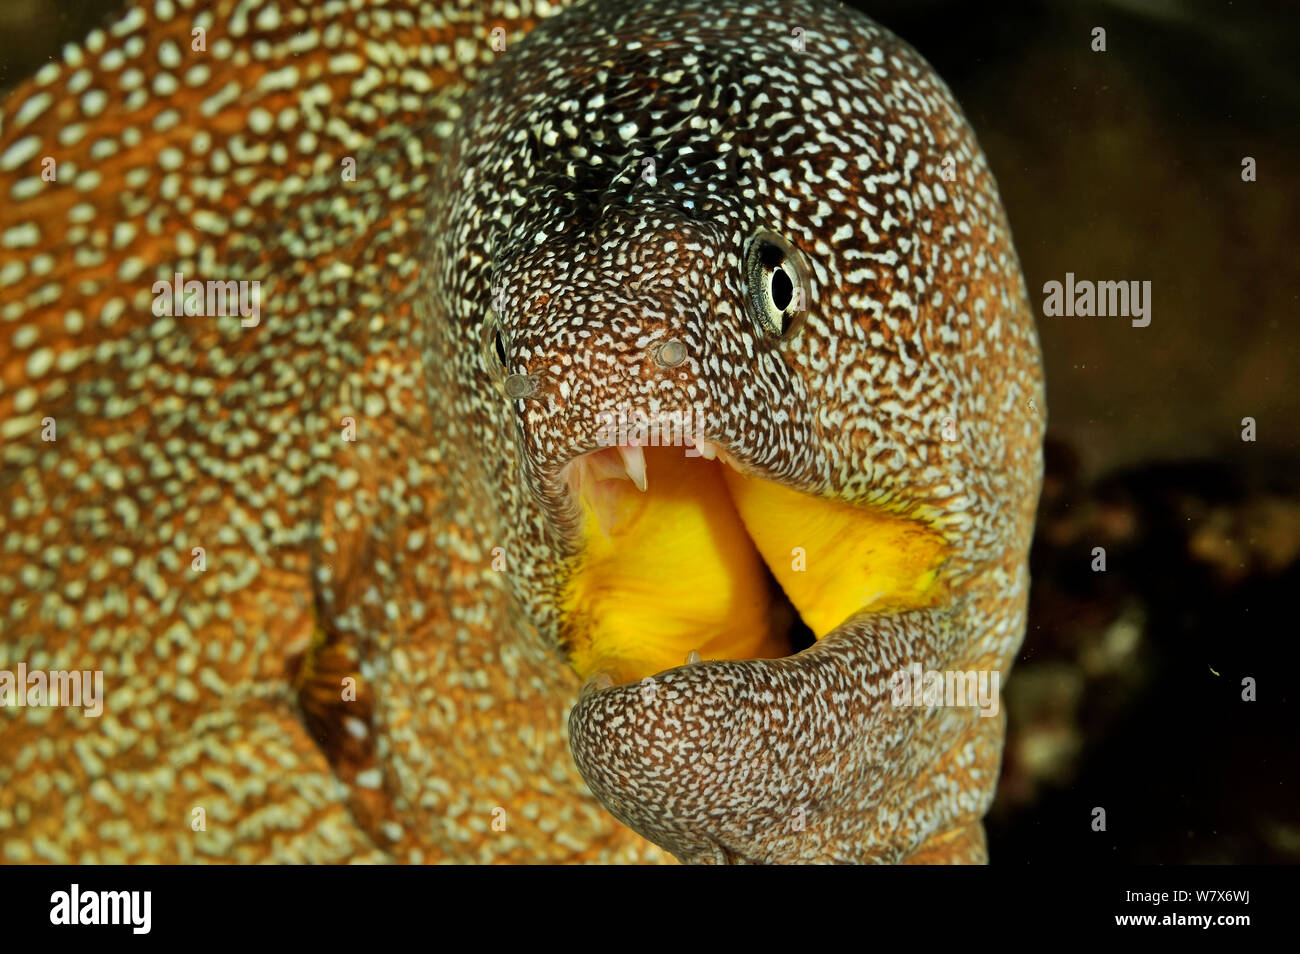 Close-up of the head of a Yellowmouth / Starry moray (Gymnothorax nudivomer) with mouth open, coast of Dhofar and Hallaniyat islands, Oman. Arabian Sea. Stock Photo